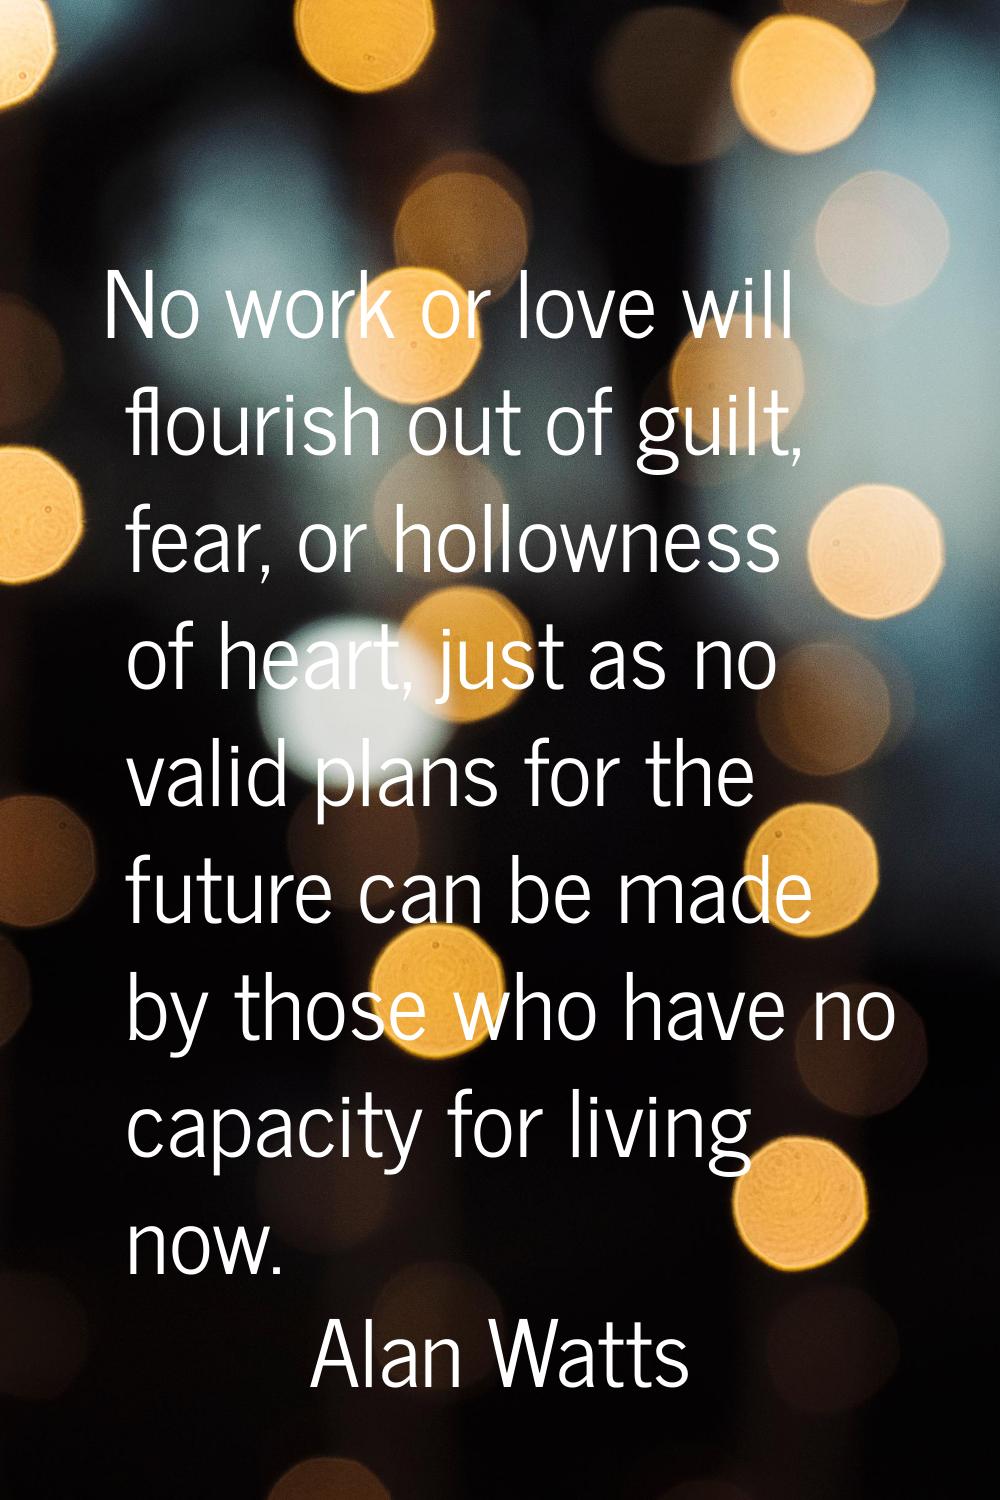 No work or love will flourish out of guilt, fear, or hollowness of heart, just as no valid plans fo